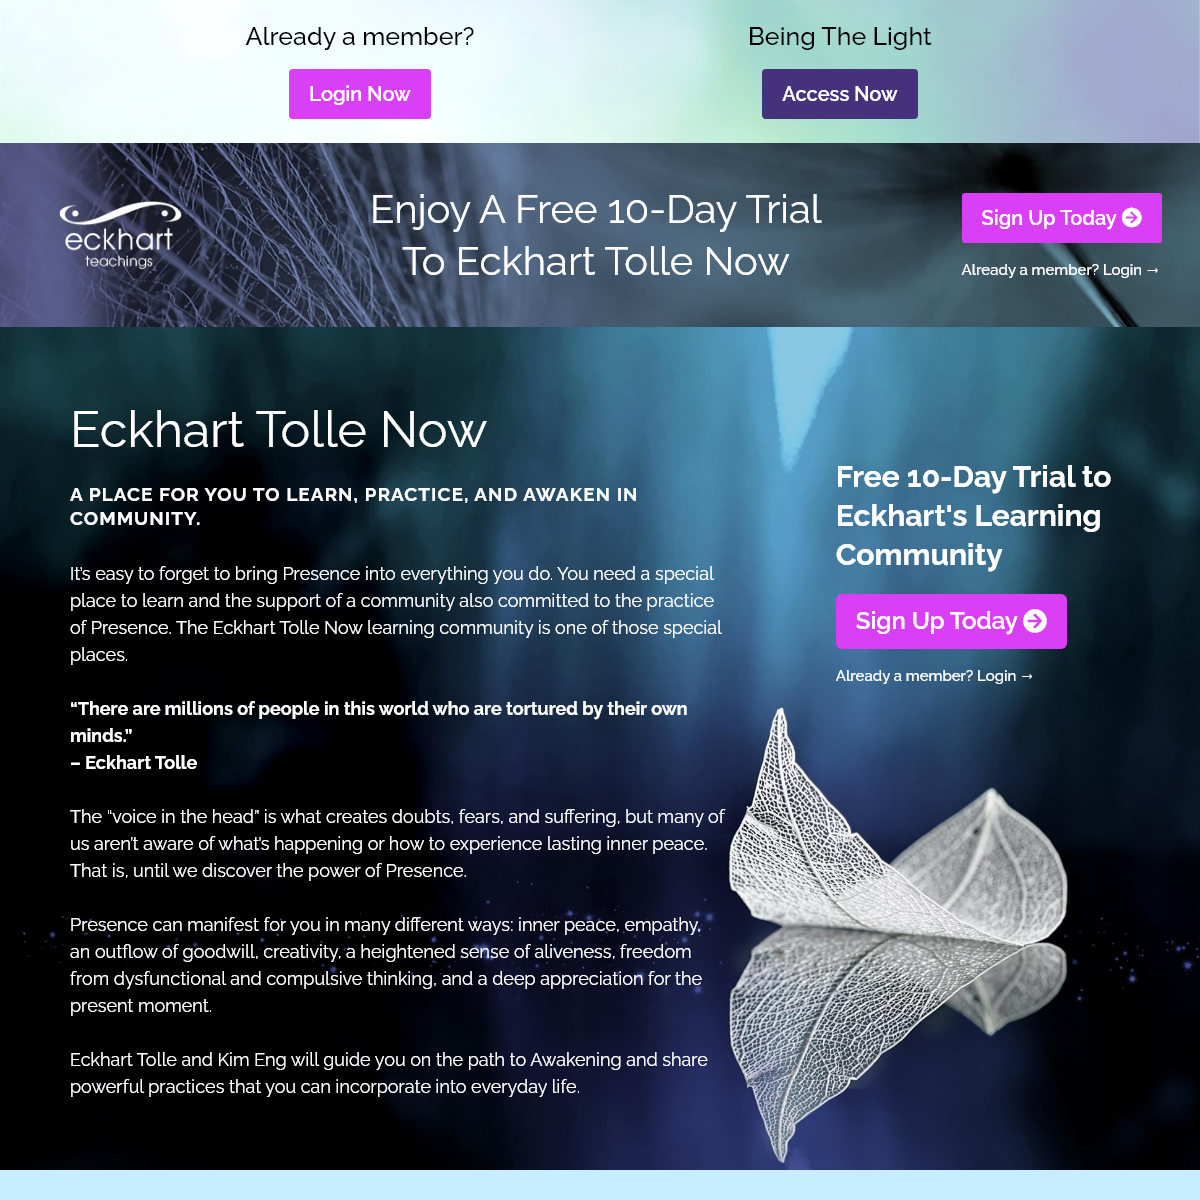 A complete backup of eckharttolletv.com